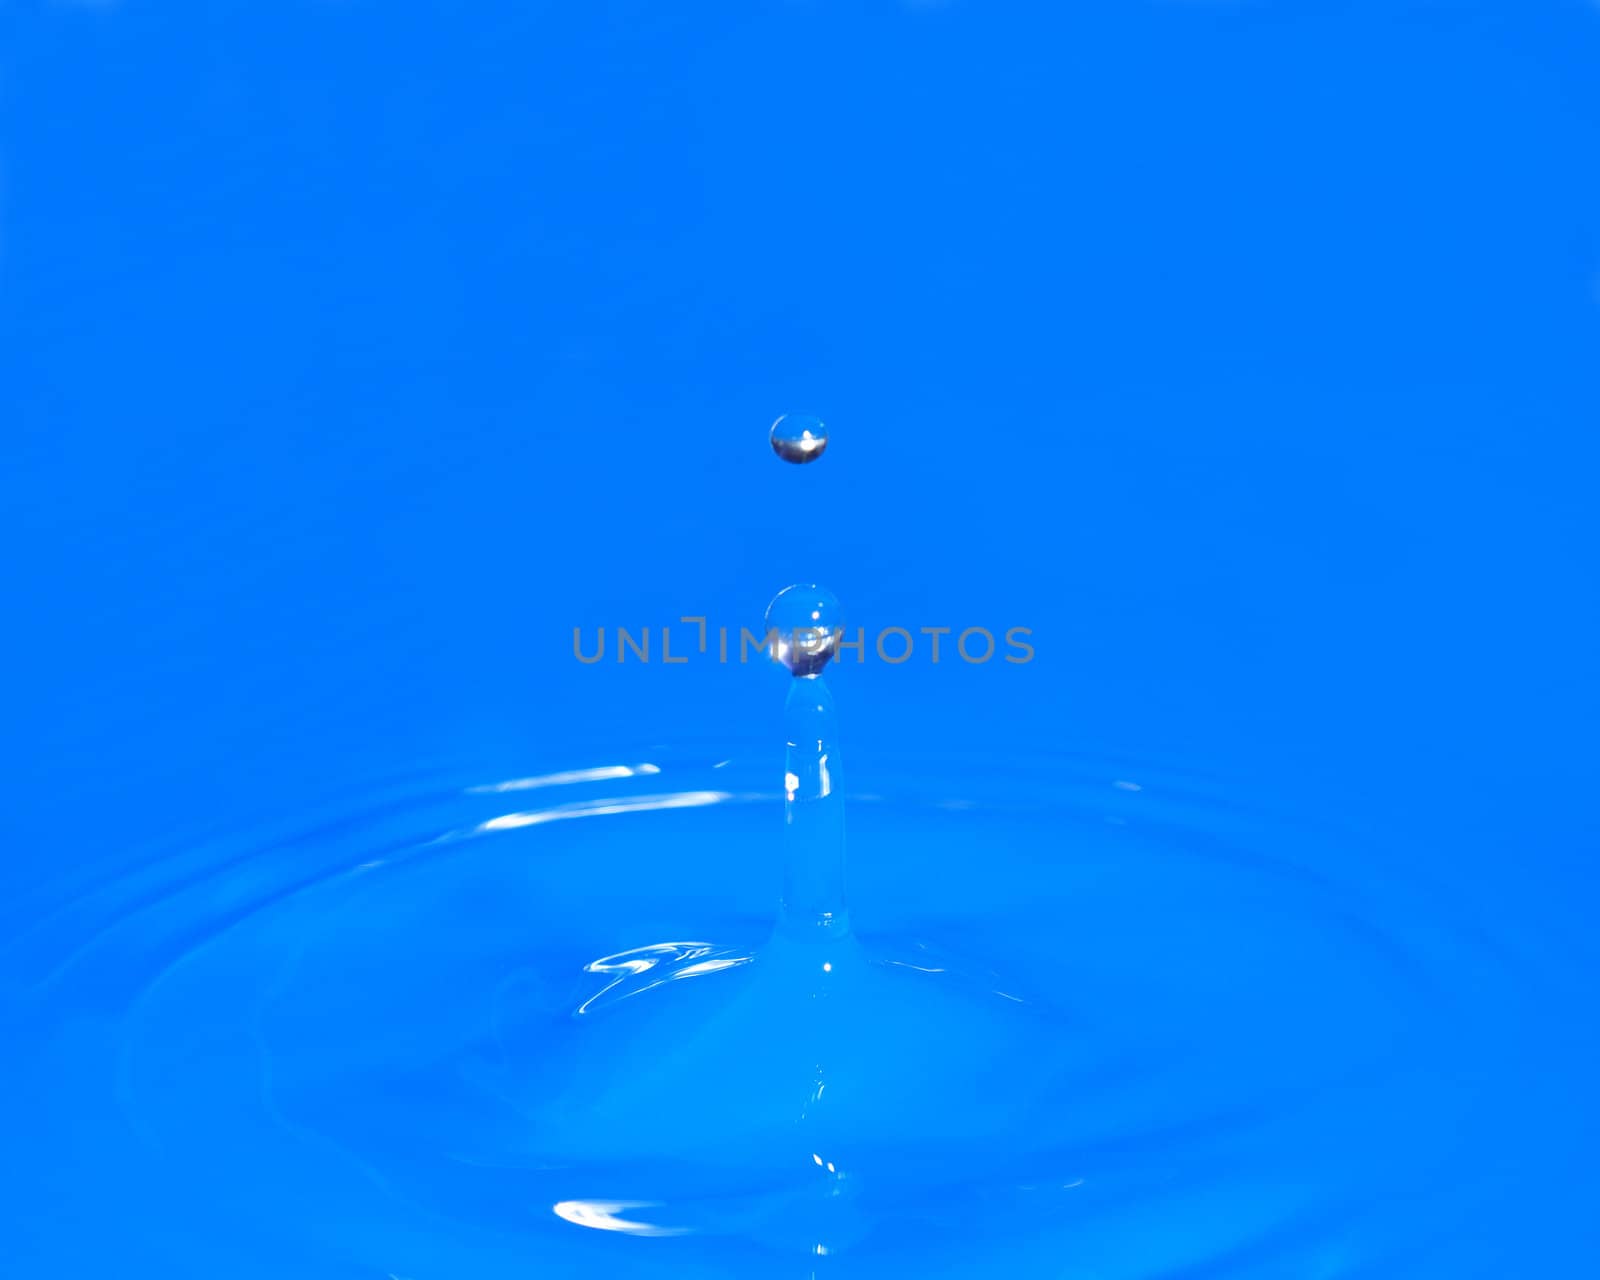 A waterdrop has been photographed on it's upward return.